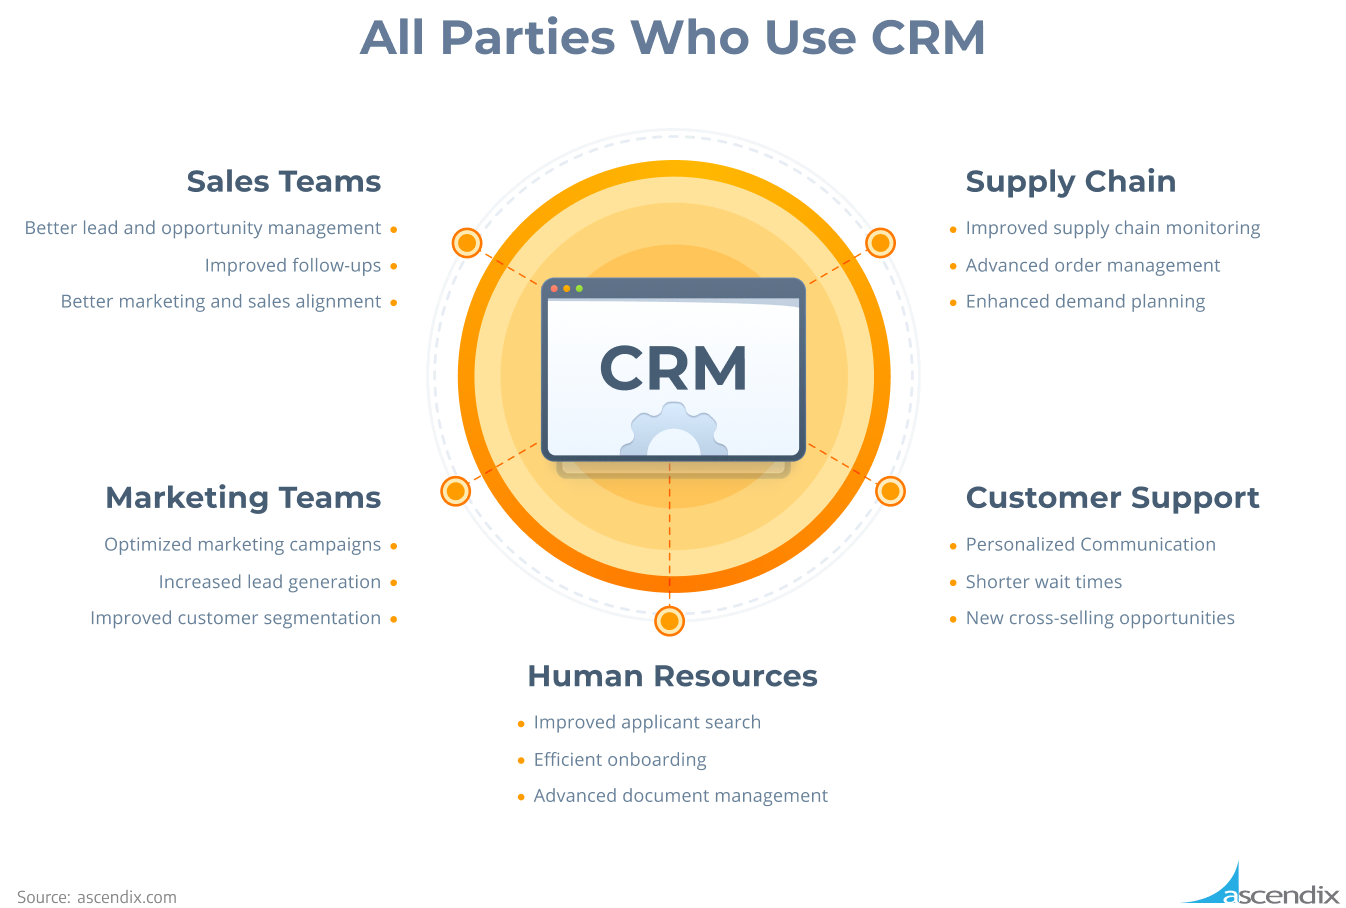 All Parties Who Use CRM